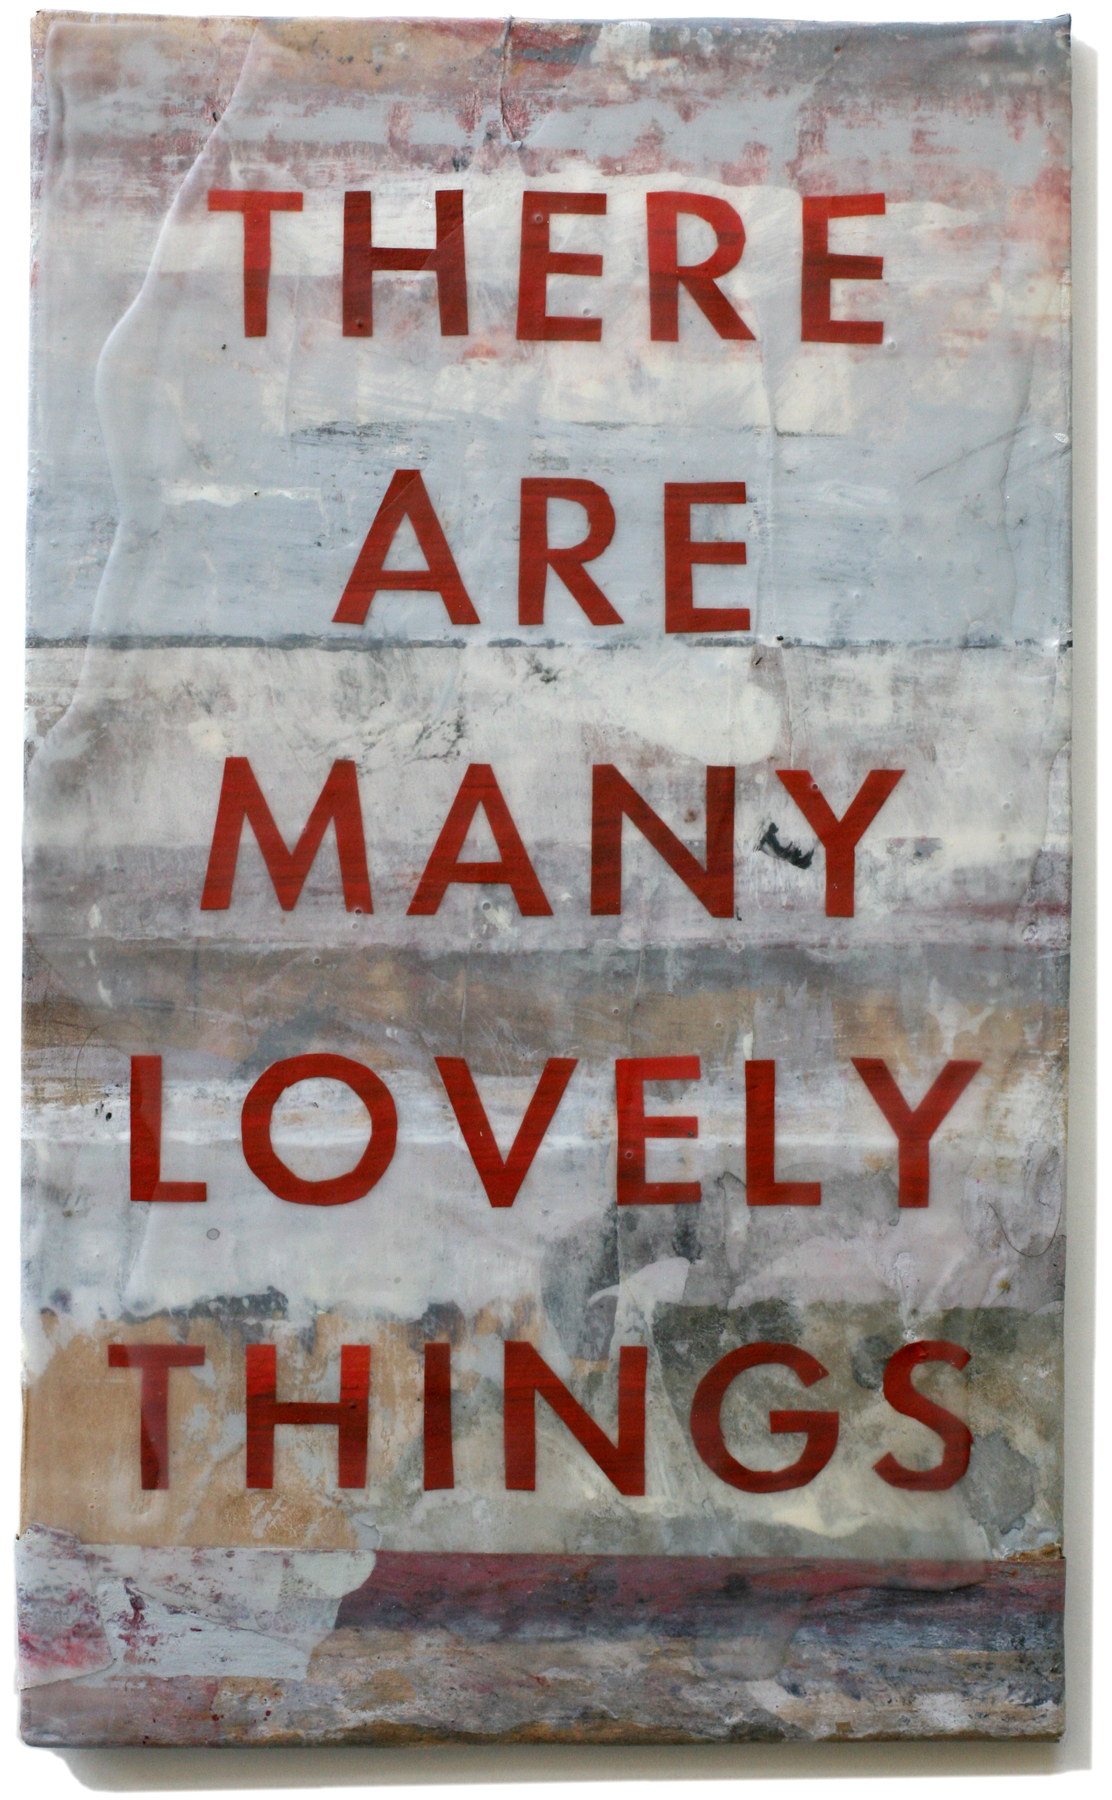 Lovely Things 32, 10" x 6", 2008-2010 (private collection)